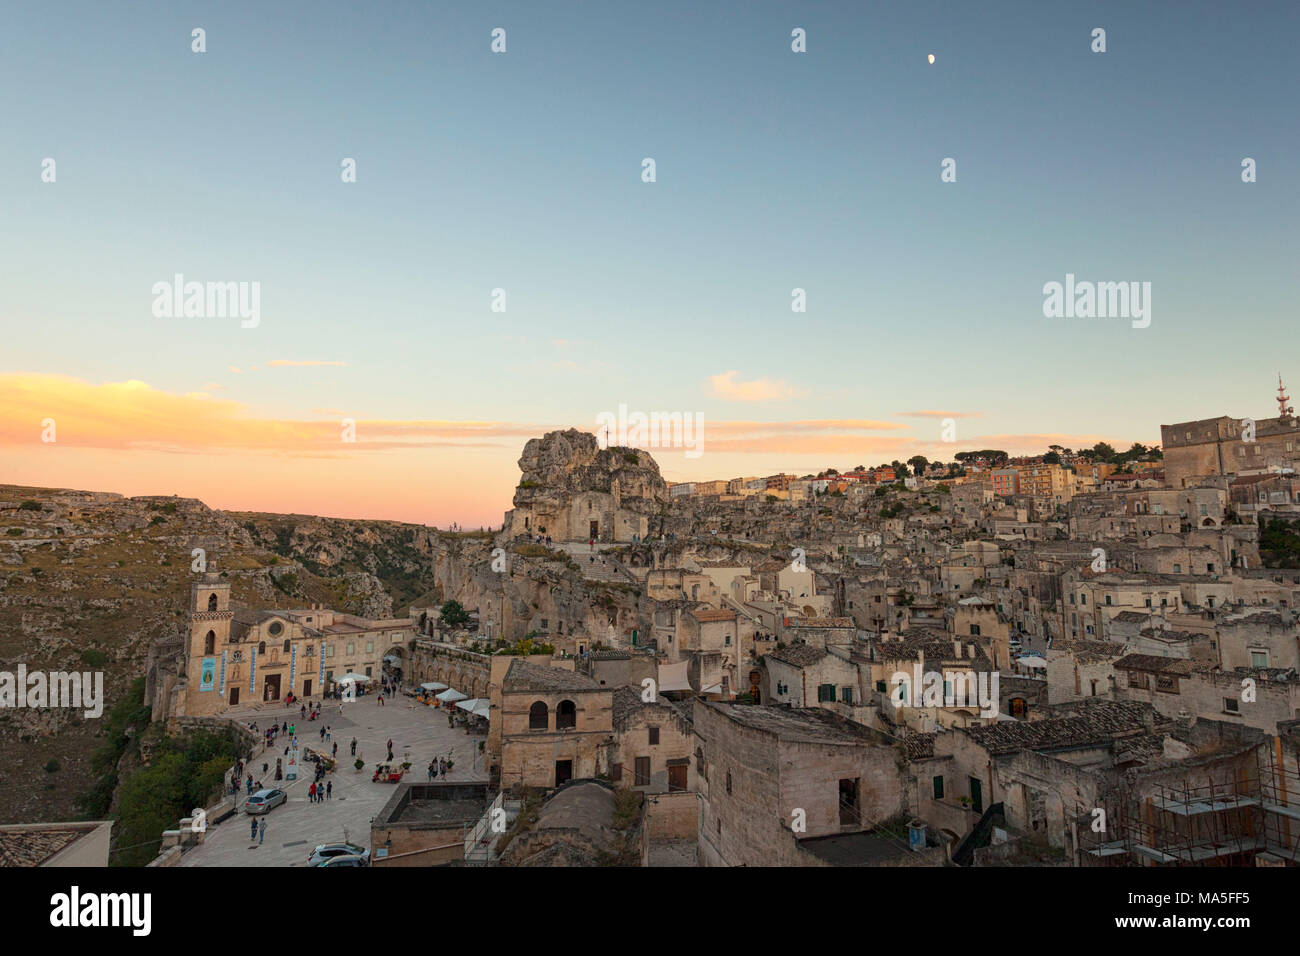 View of the ancient town and historical center called Sassi perched on rocks on top of hill, Matera, Basilicata, Italy, Europe Stock Photo